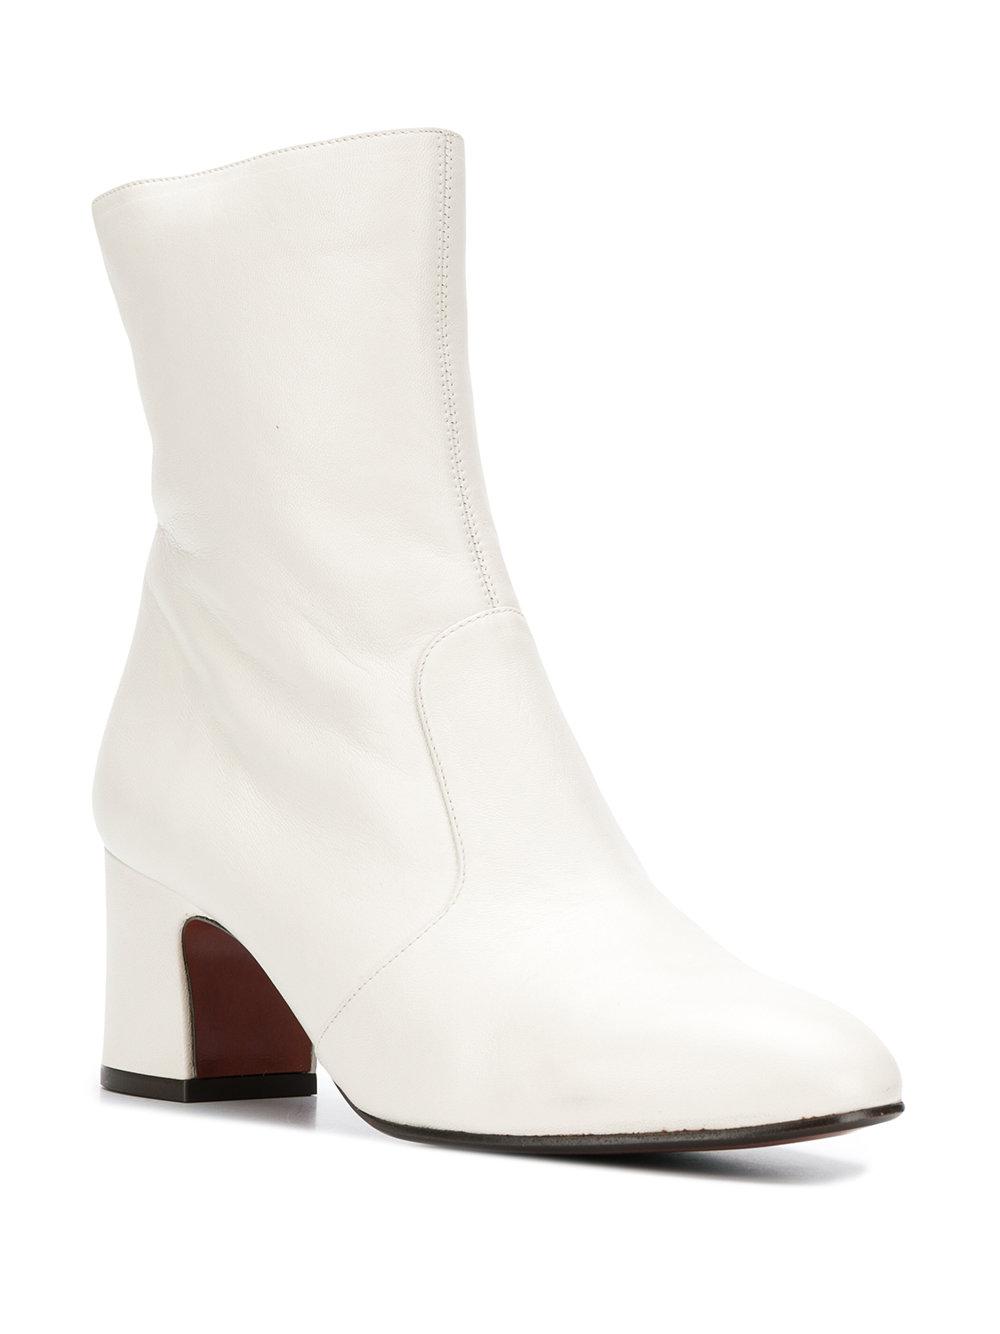 Chie Mihara Leather Naylon Low-heel Boots in White - Lyst